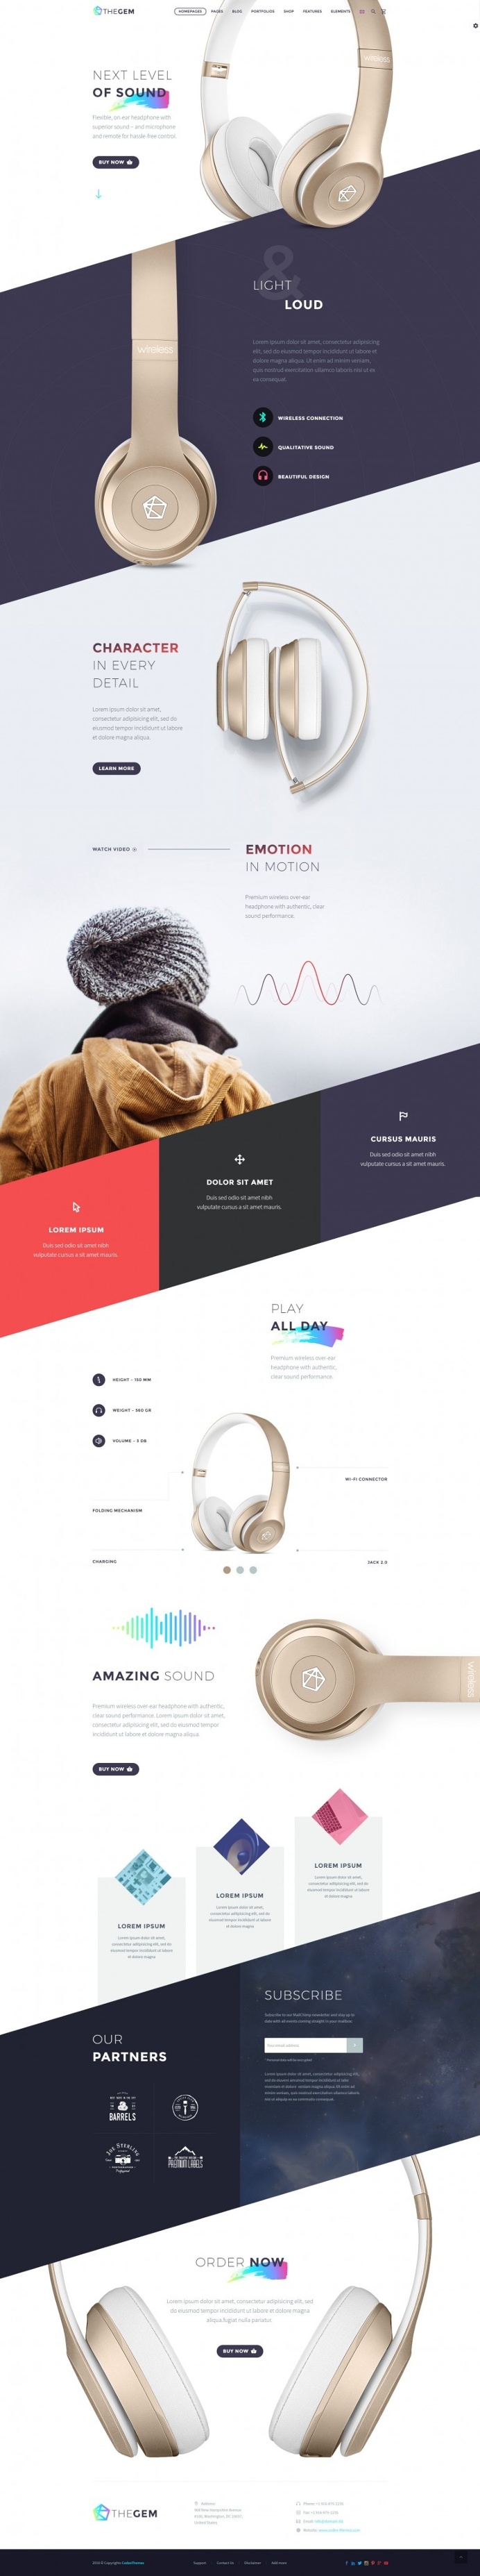 Product Page screen design idea #195: TheGem – Creative Product Landing Page